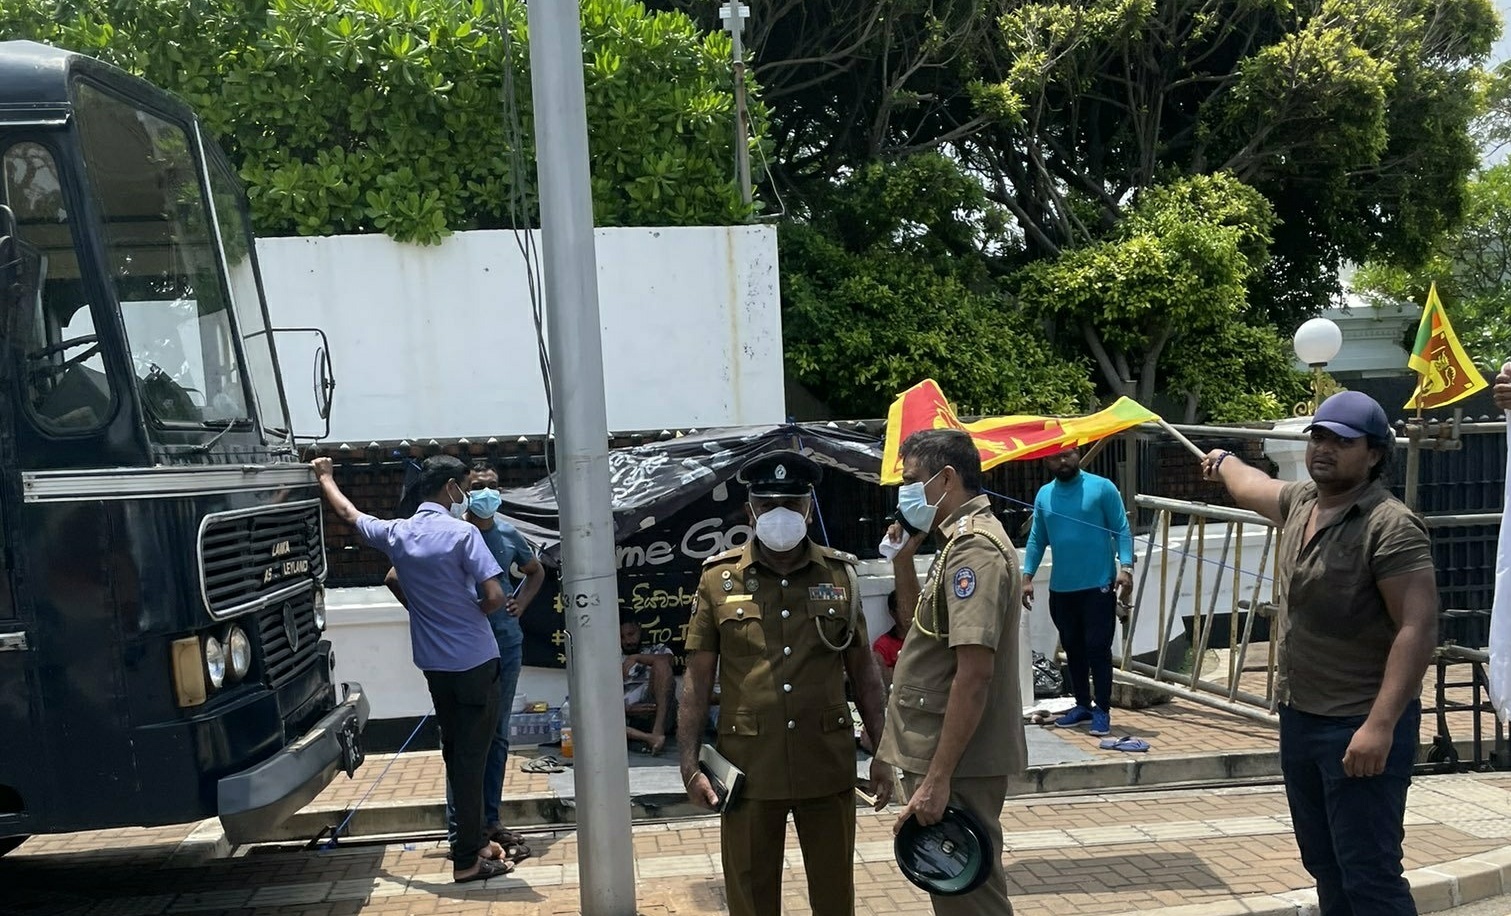 Court order to remove protestors & structures near Temple Trees